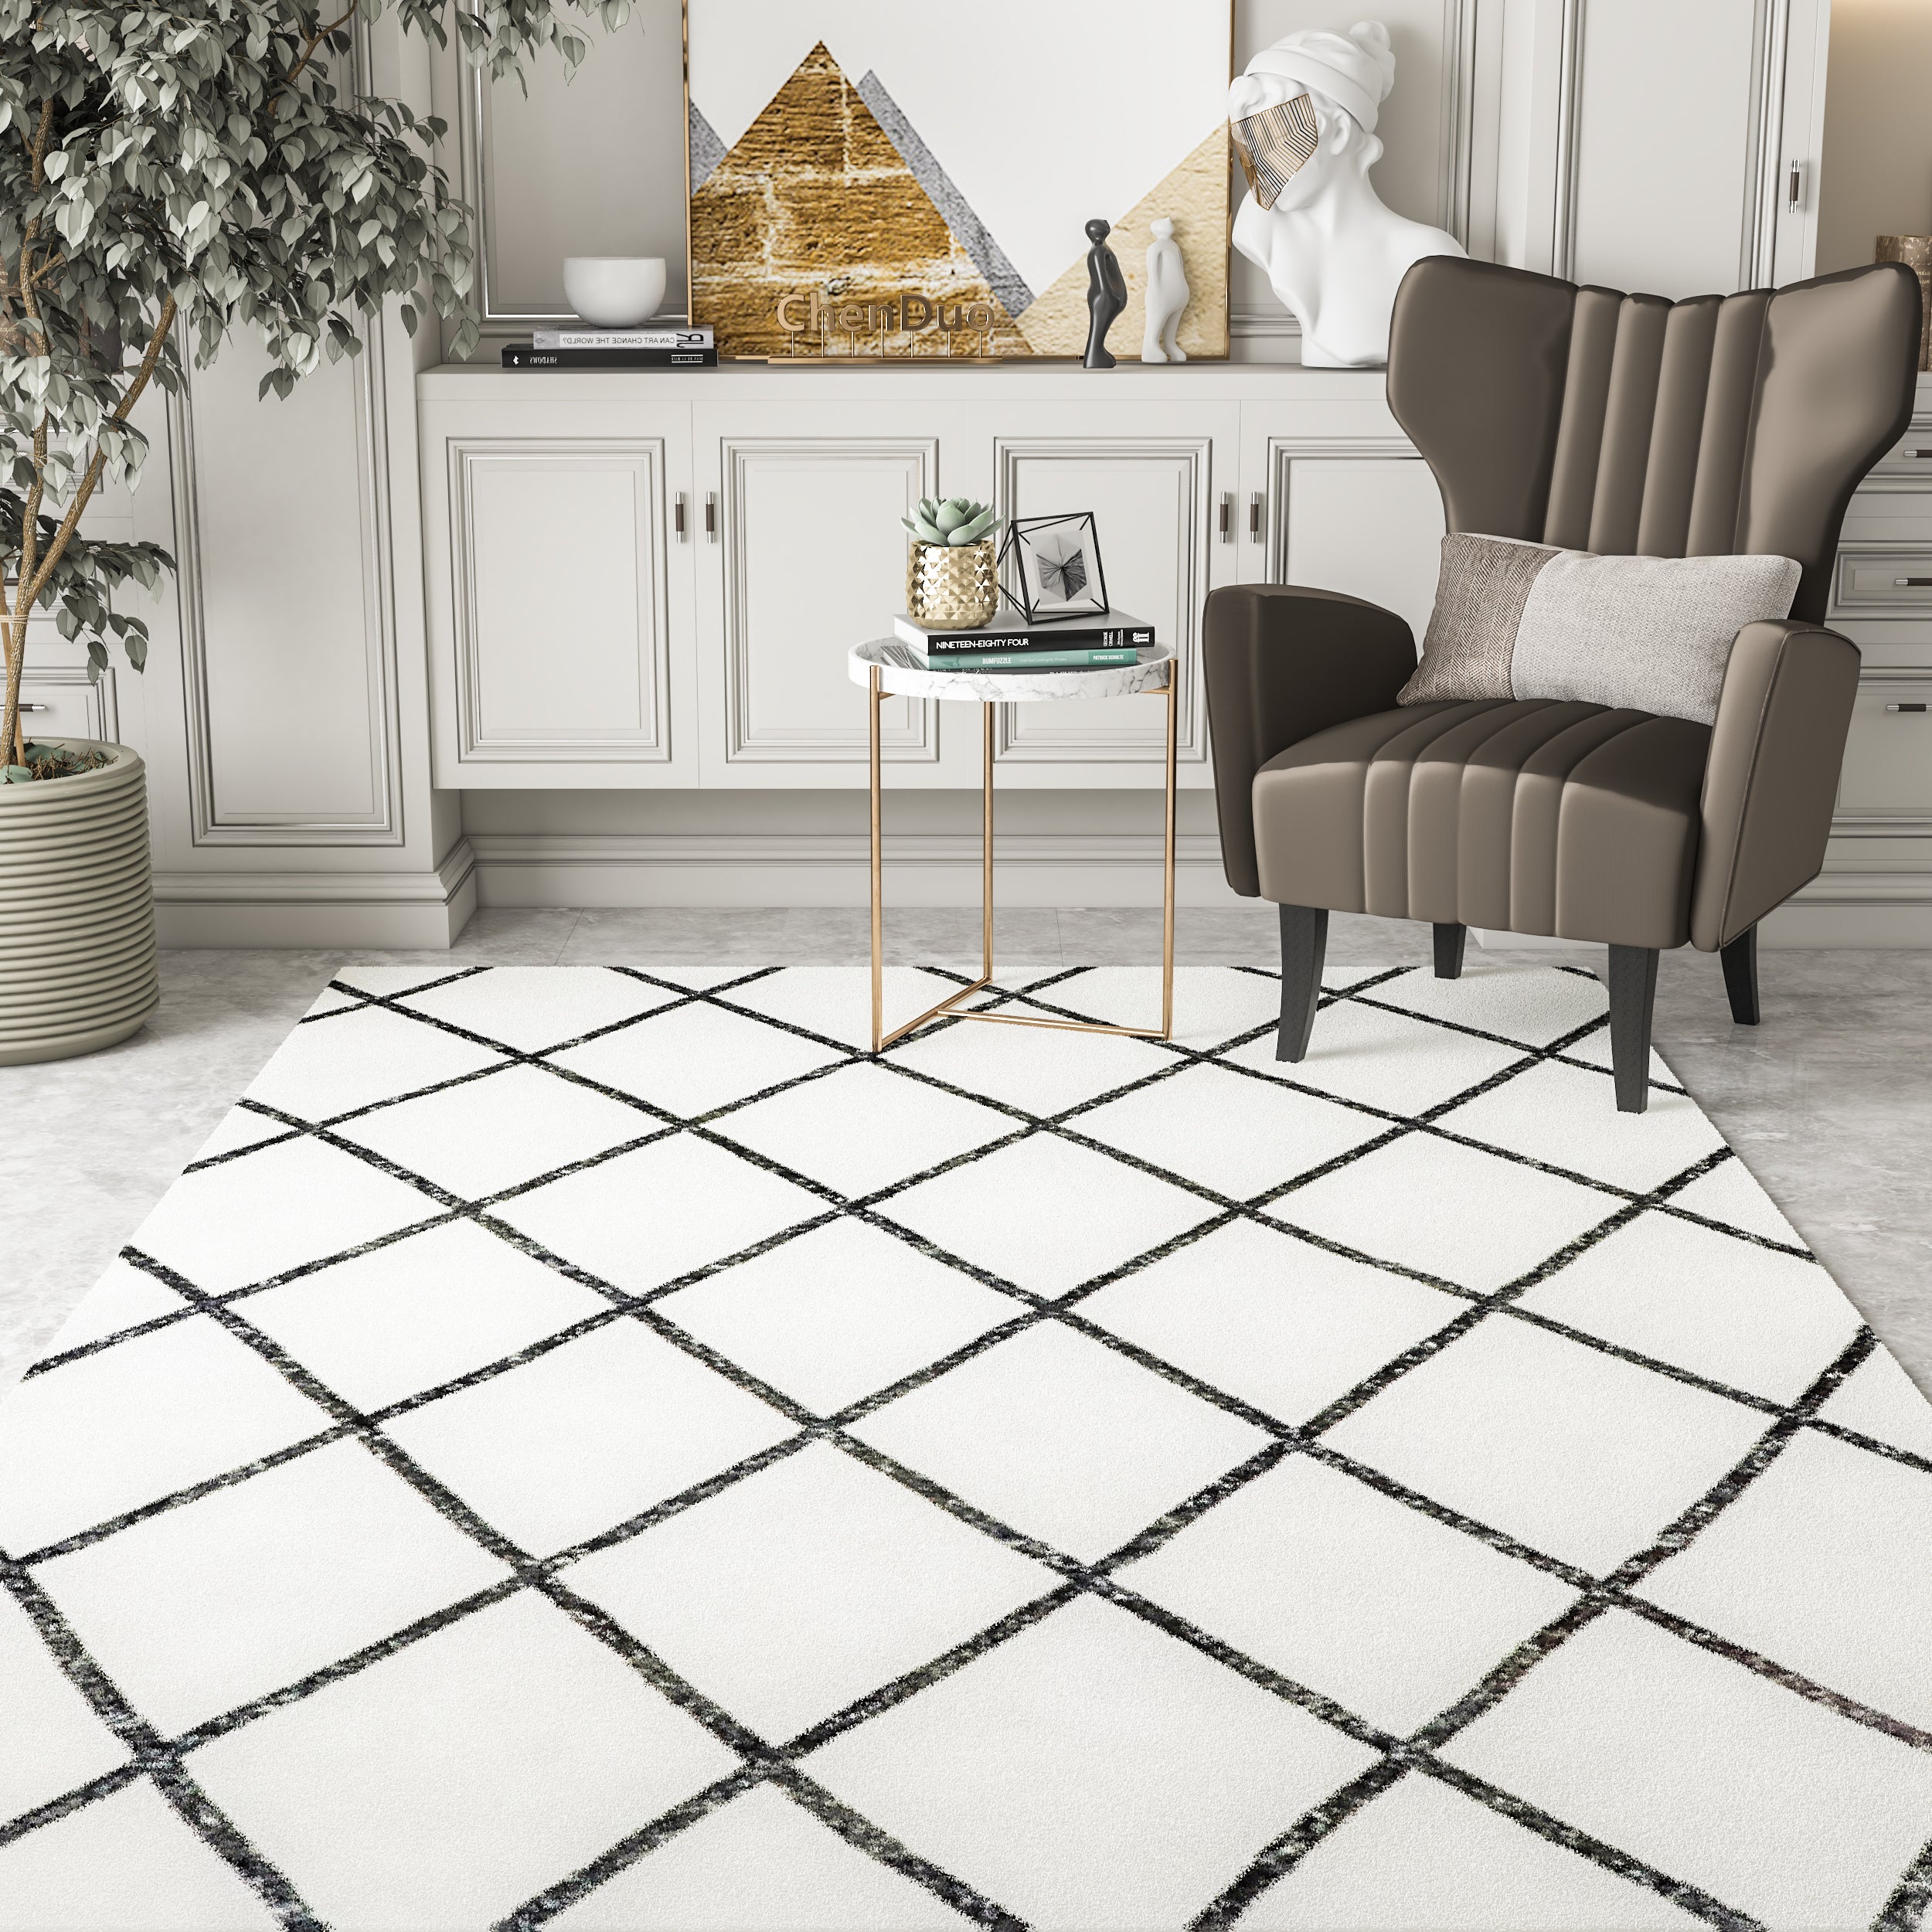 Snailhome® Area Rug Geometric Large Contemporary Living Room